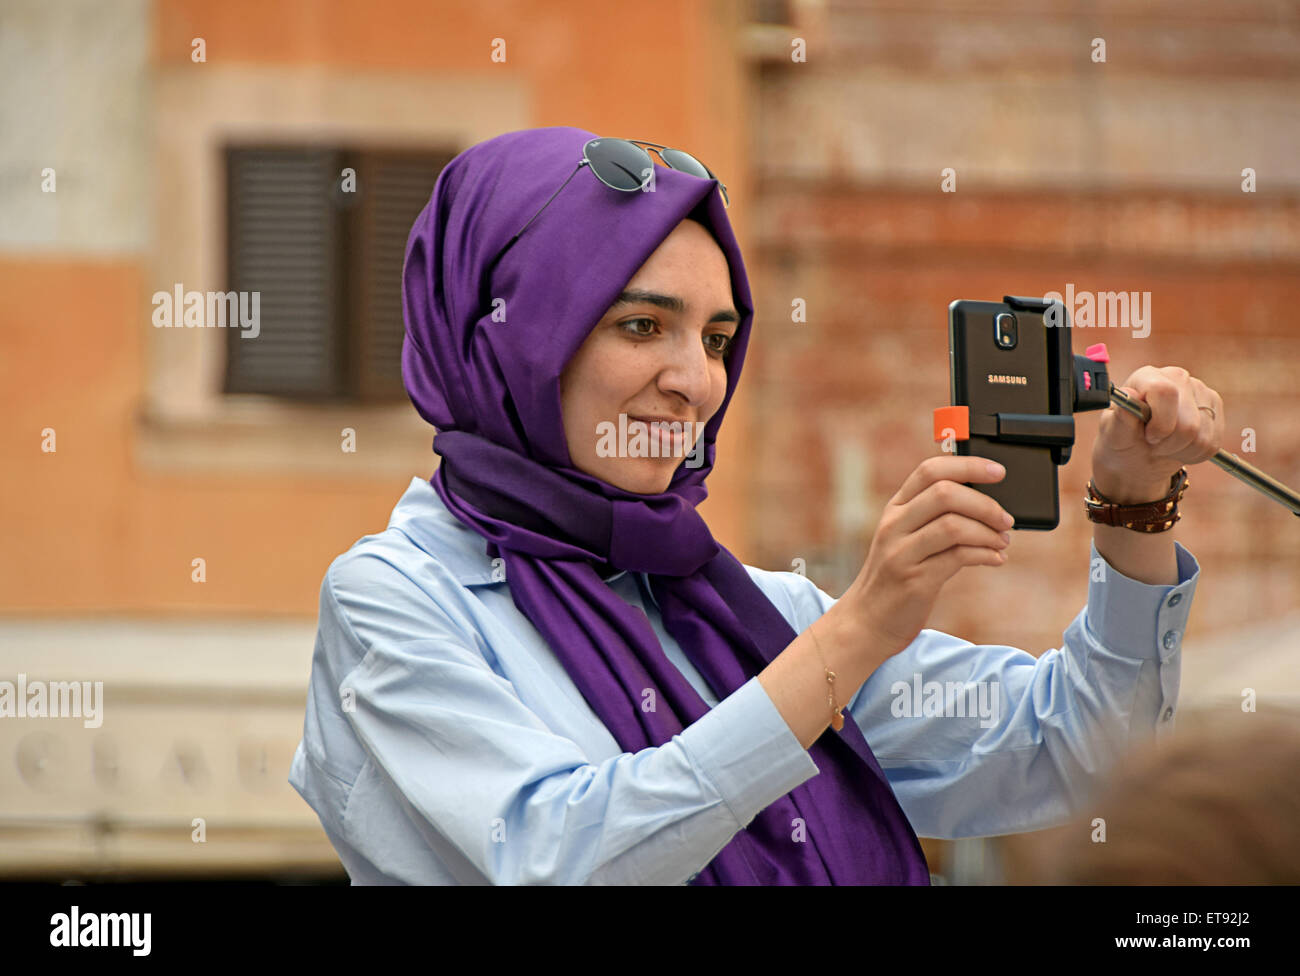 A Muslim woman wearing a purple hijab takes a selfie near the Pantheon in Rome, Italy Stock Photo